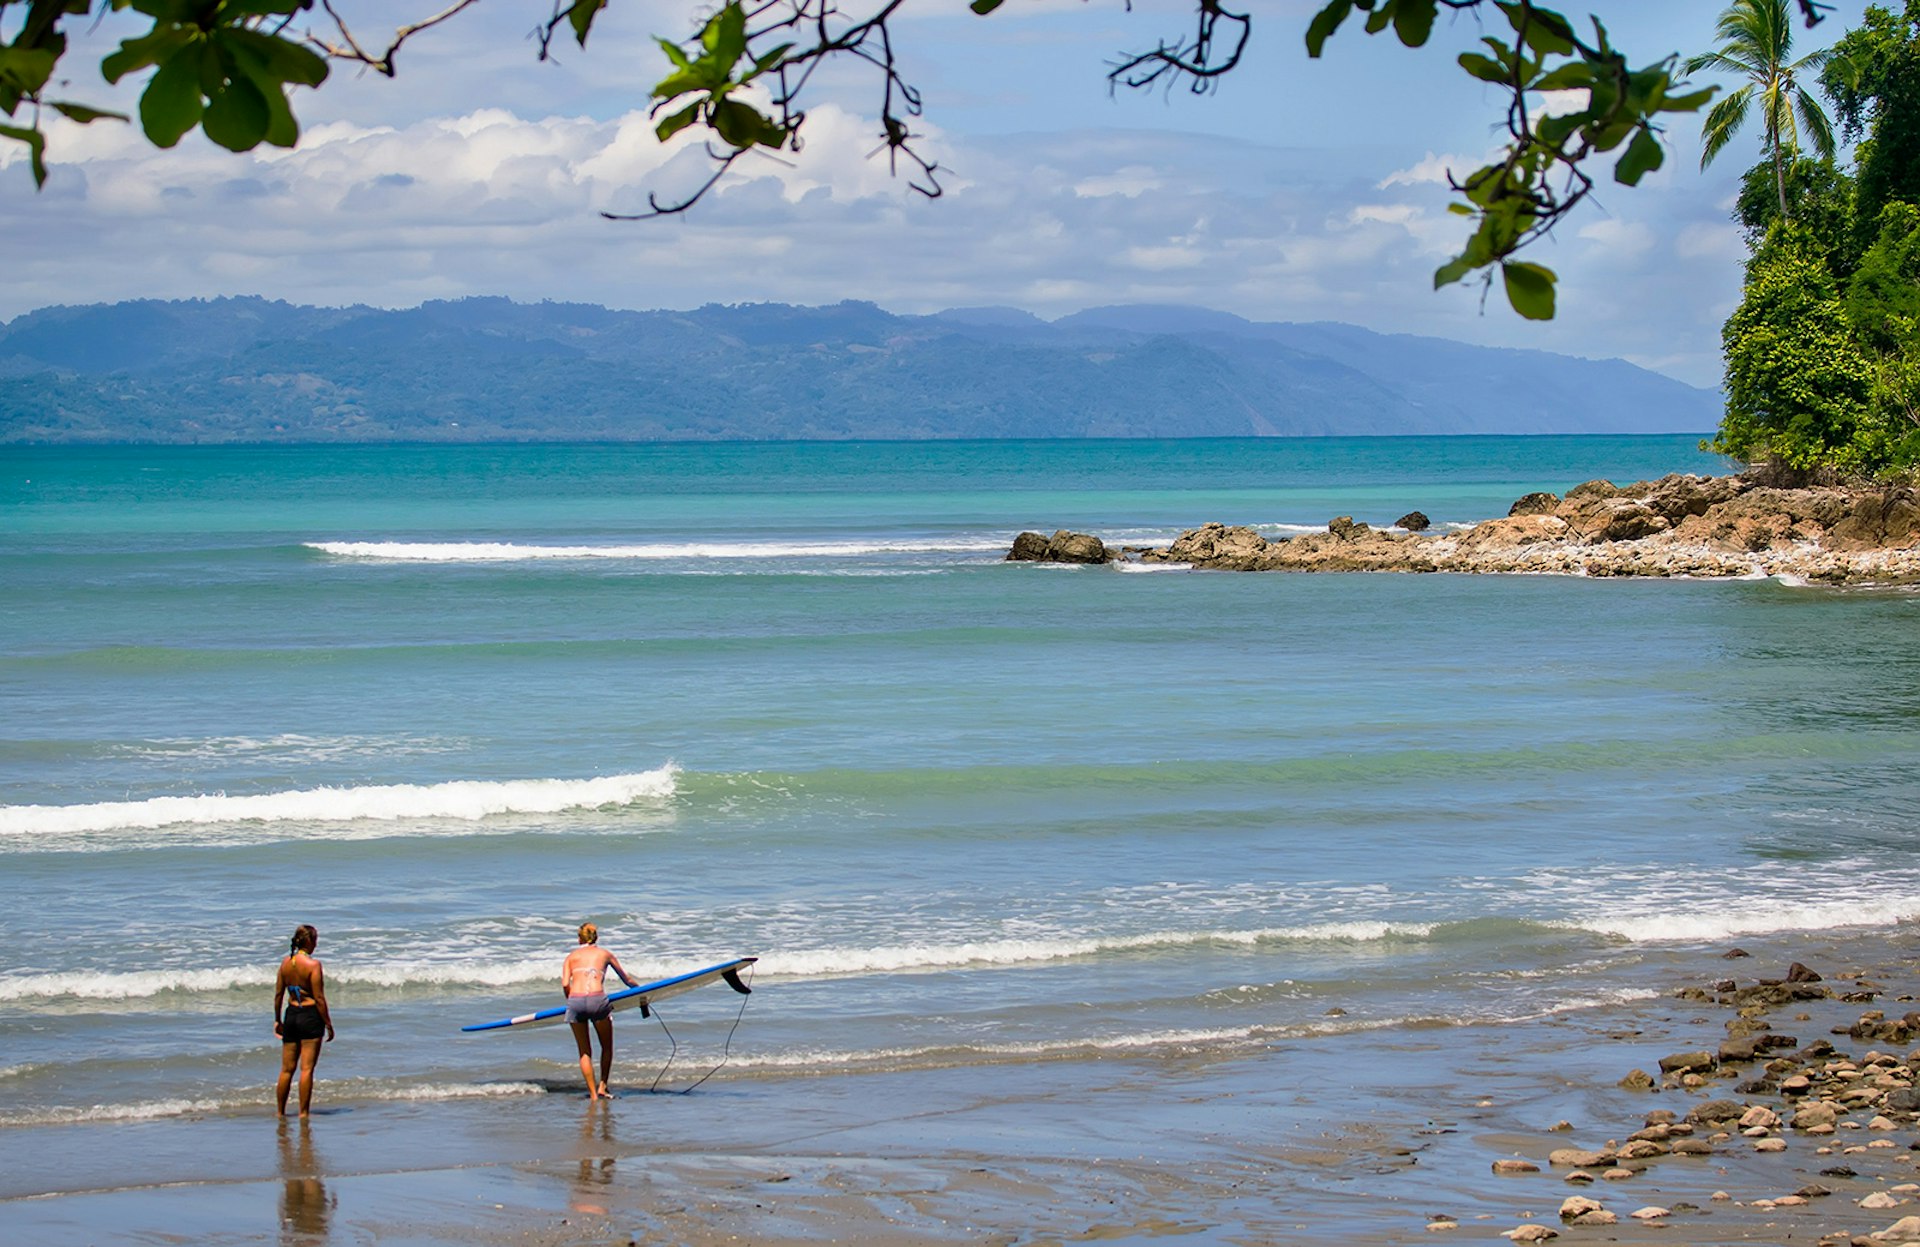 Two surfers on the beach on Osa Peninsula, Costa Rica